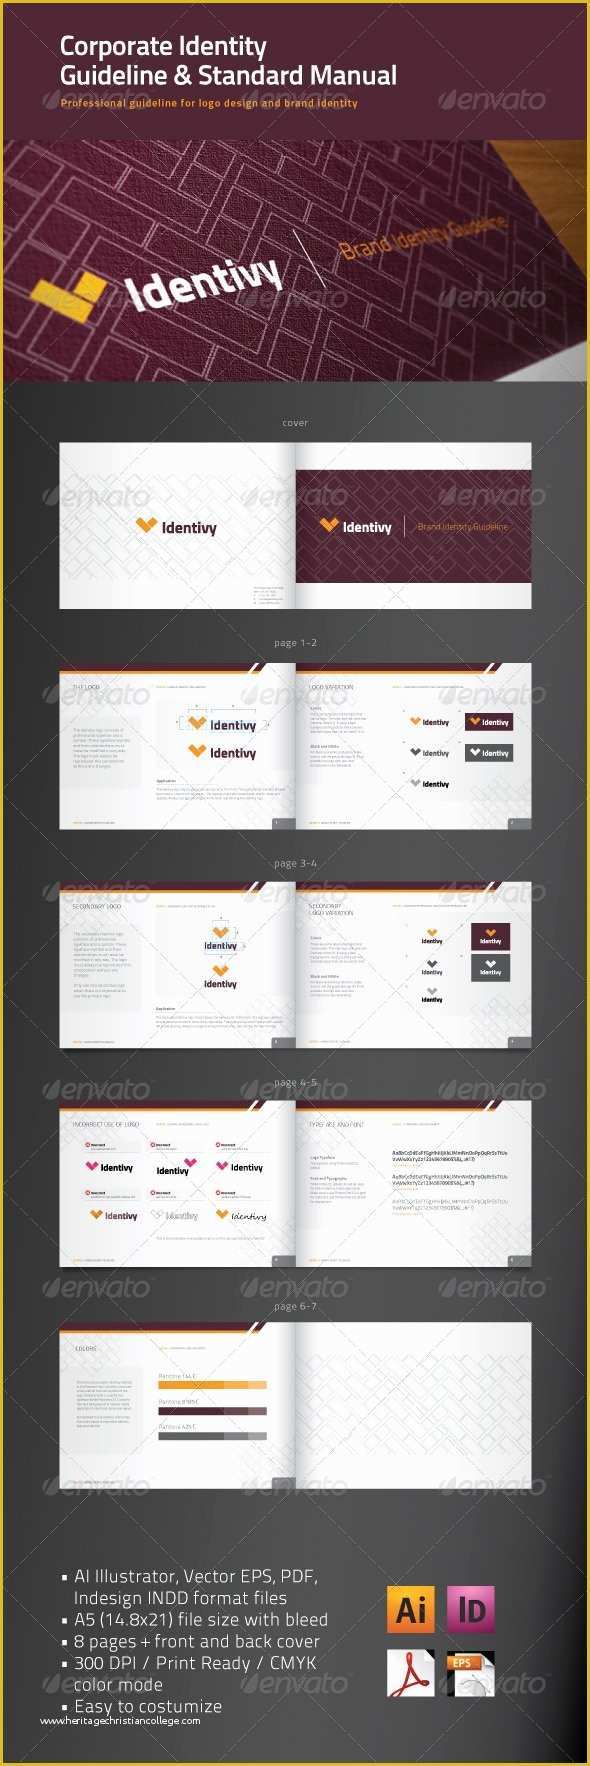 Brand Guidelines Template Indesign Free Of Free Brand Manual Template Vfxfuture